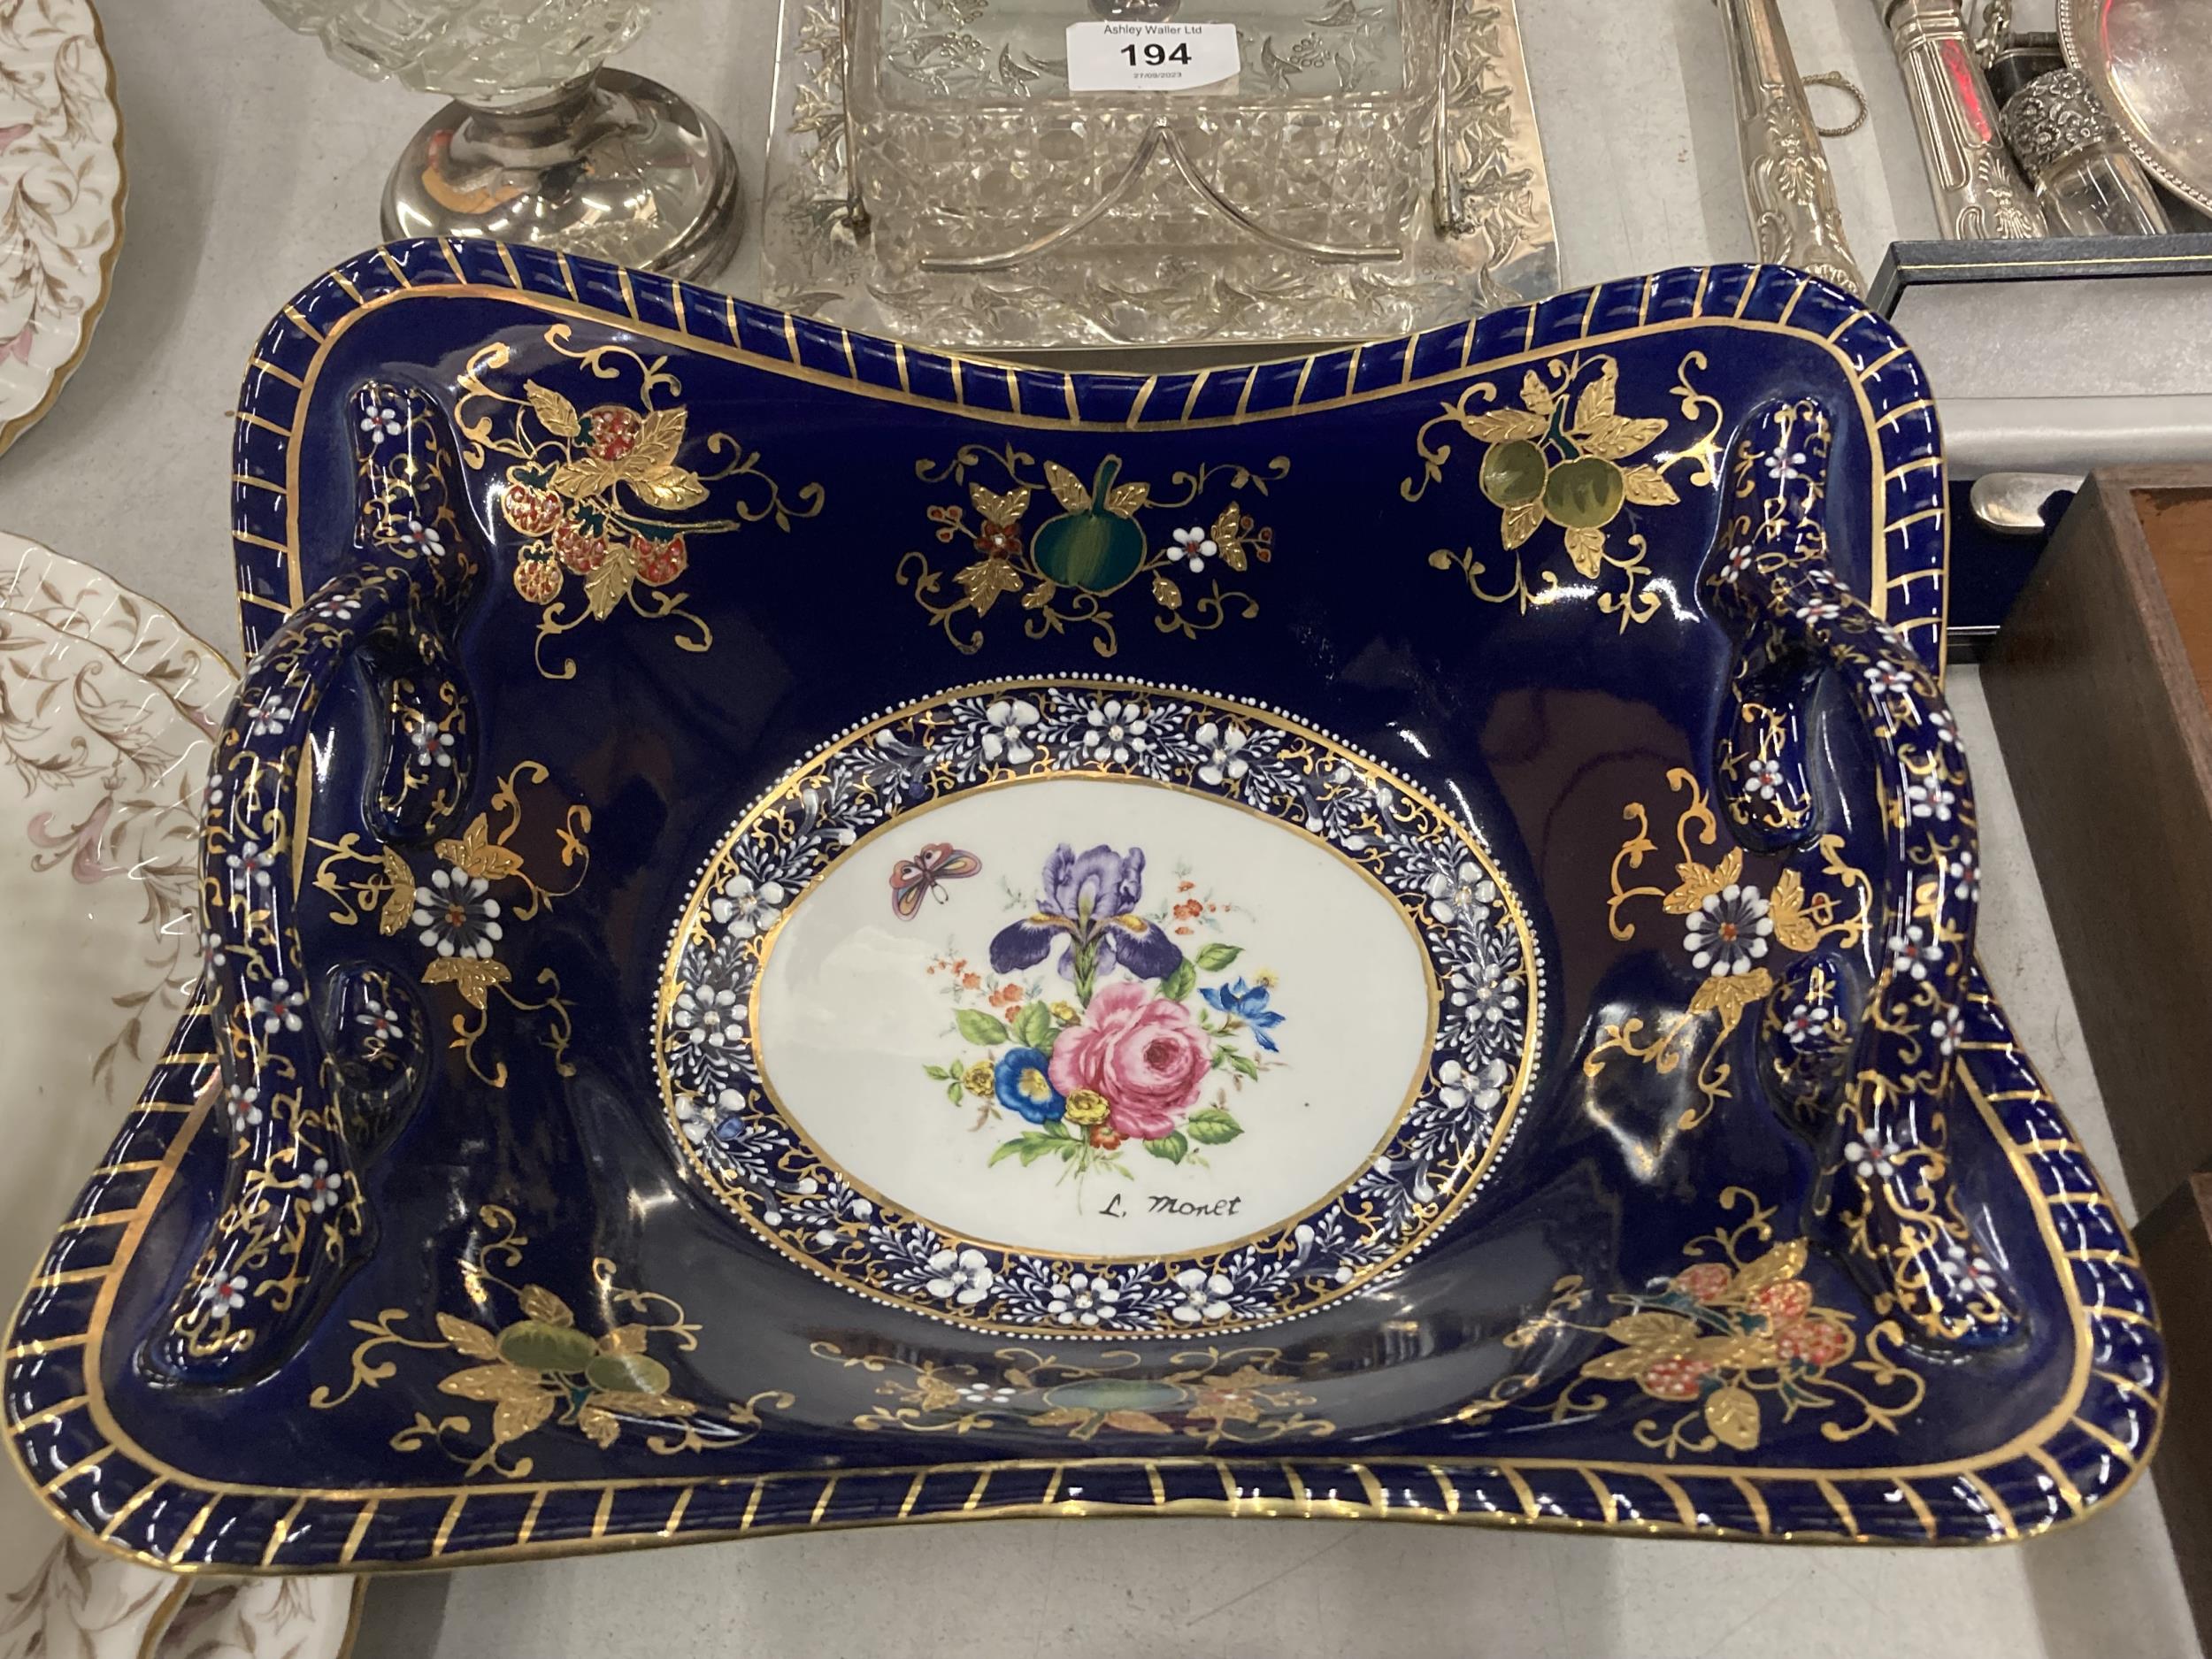 A COBALT BLUE AND GILT TWIN HANDLED BOWL WITH HAND PAINTED DESIGN, SIGNED L.MONET - Image 2 of 4